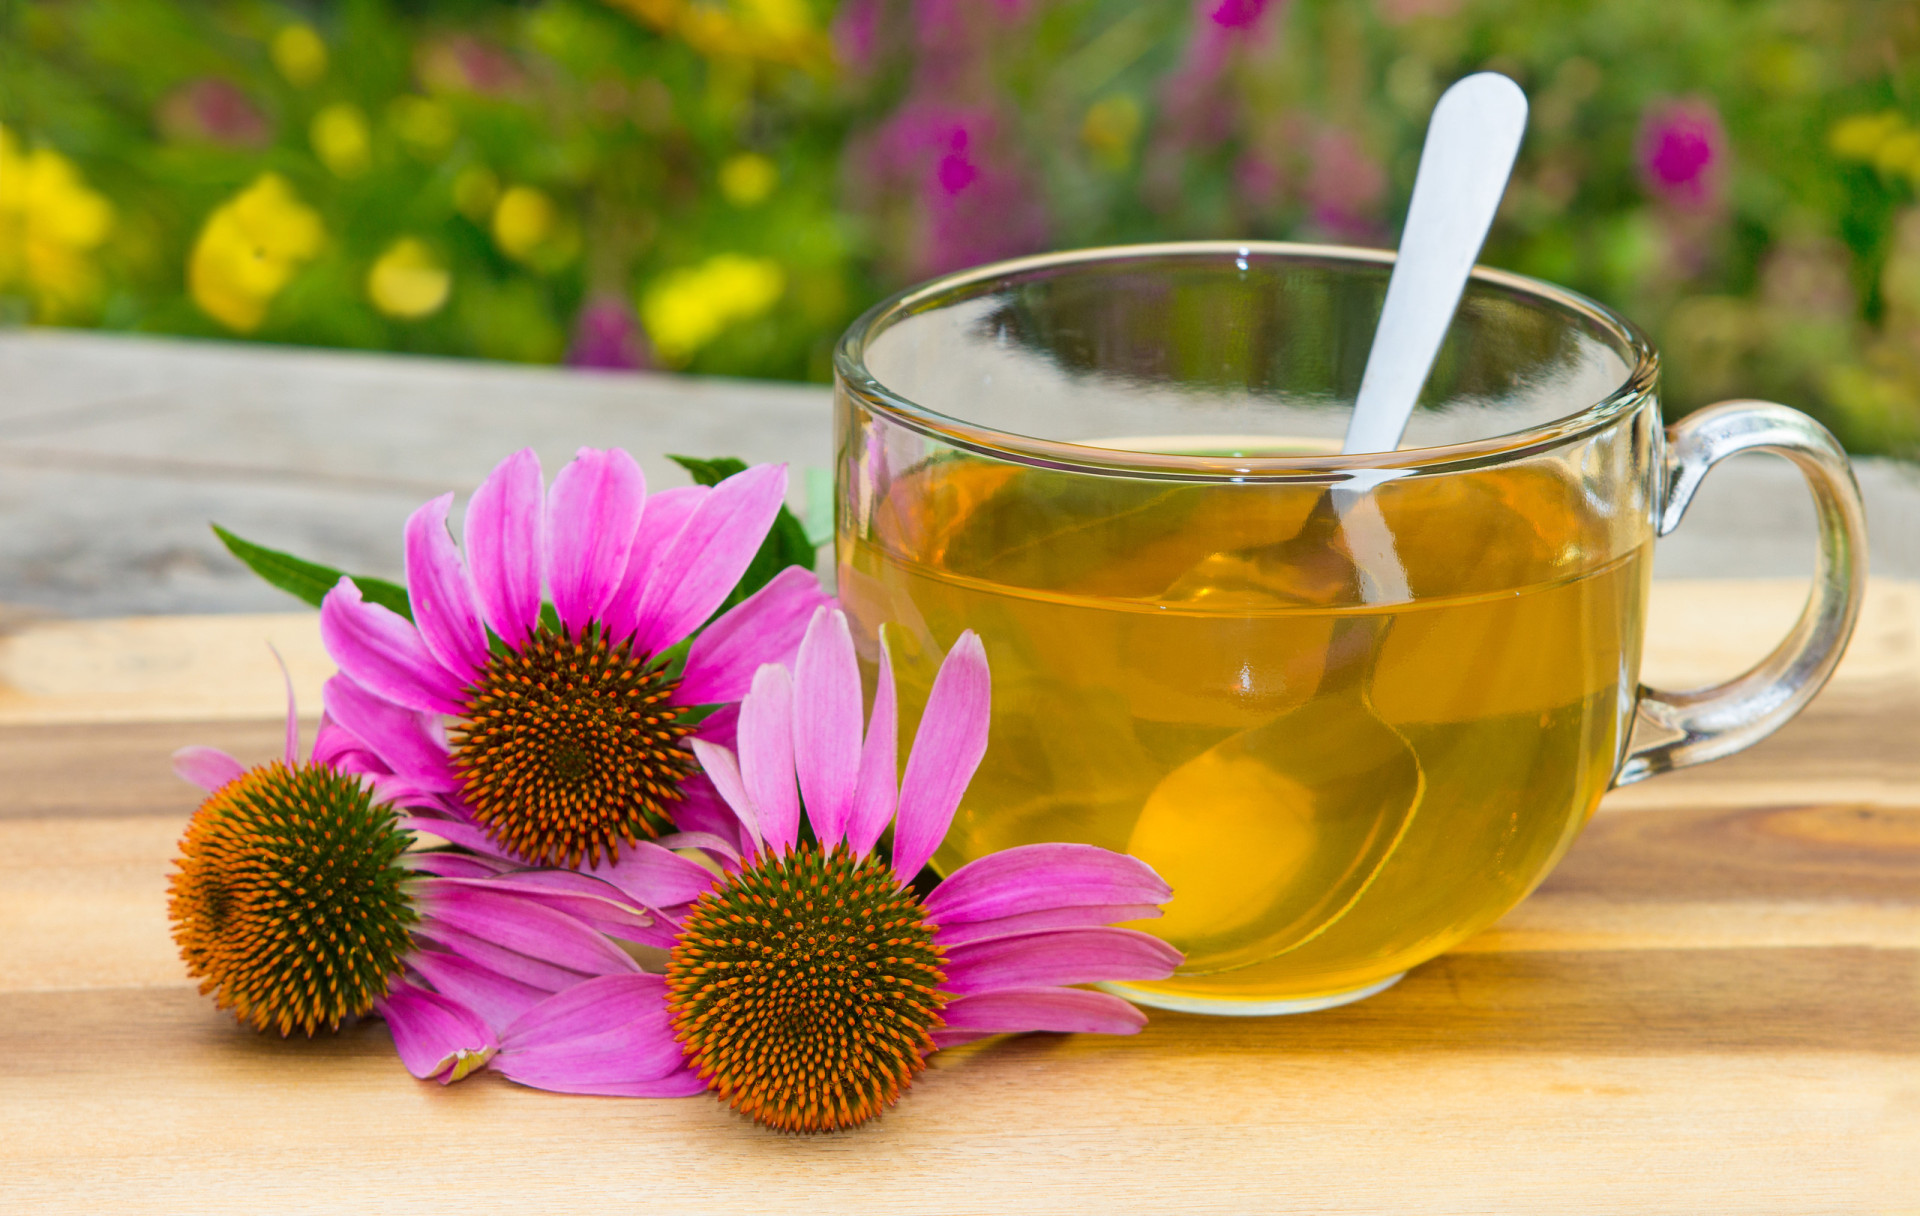 <p>Echinacea may decrease the effectiveness of immunosuppressive medication. The herb may also interact with antiretroviral drugs.</p><p>You may also like:<a href="https://www.starsinsider.com/n/173535?utm_source=msn.com&utm_medium=display&utm_campaign=referral_description&utm_content=556697en-en"> Why you have nightmares (and what you can do about it)</a></p>